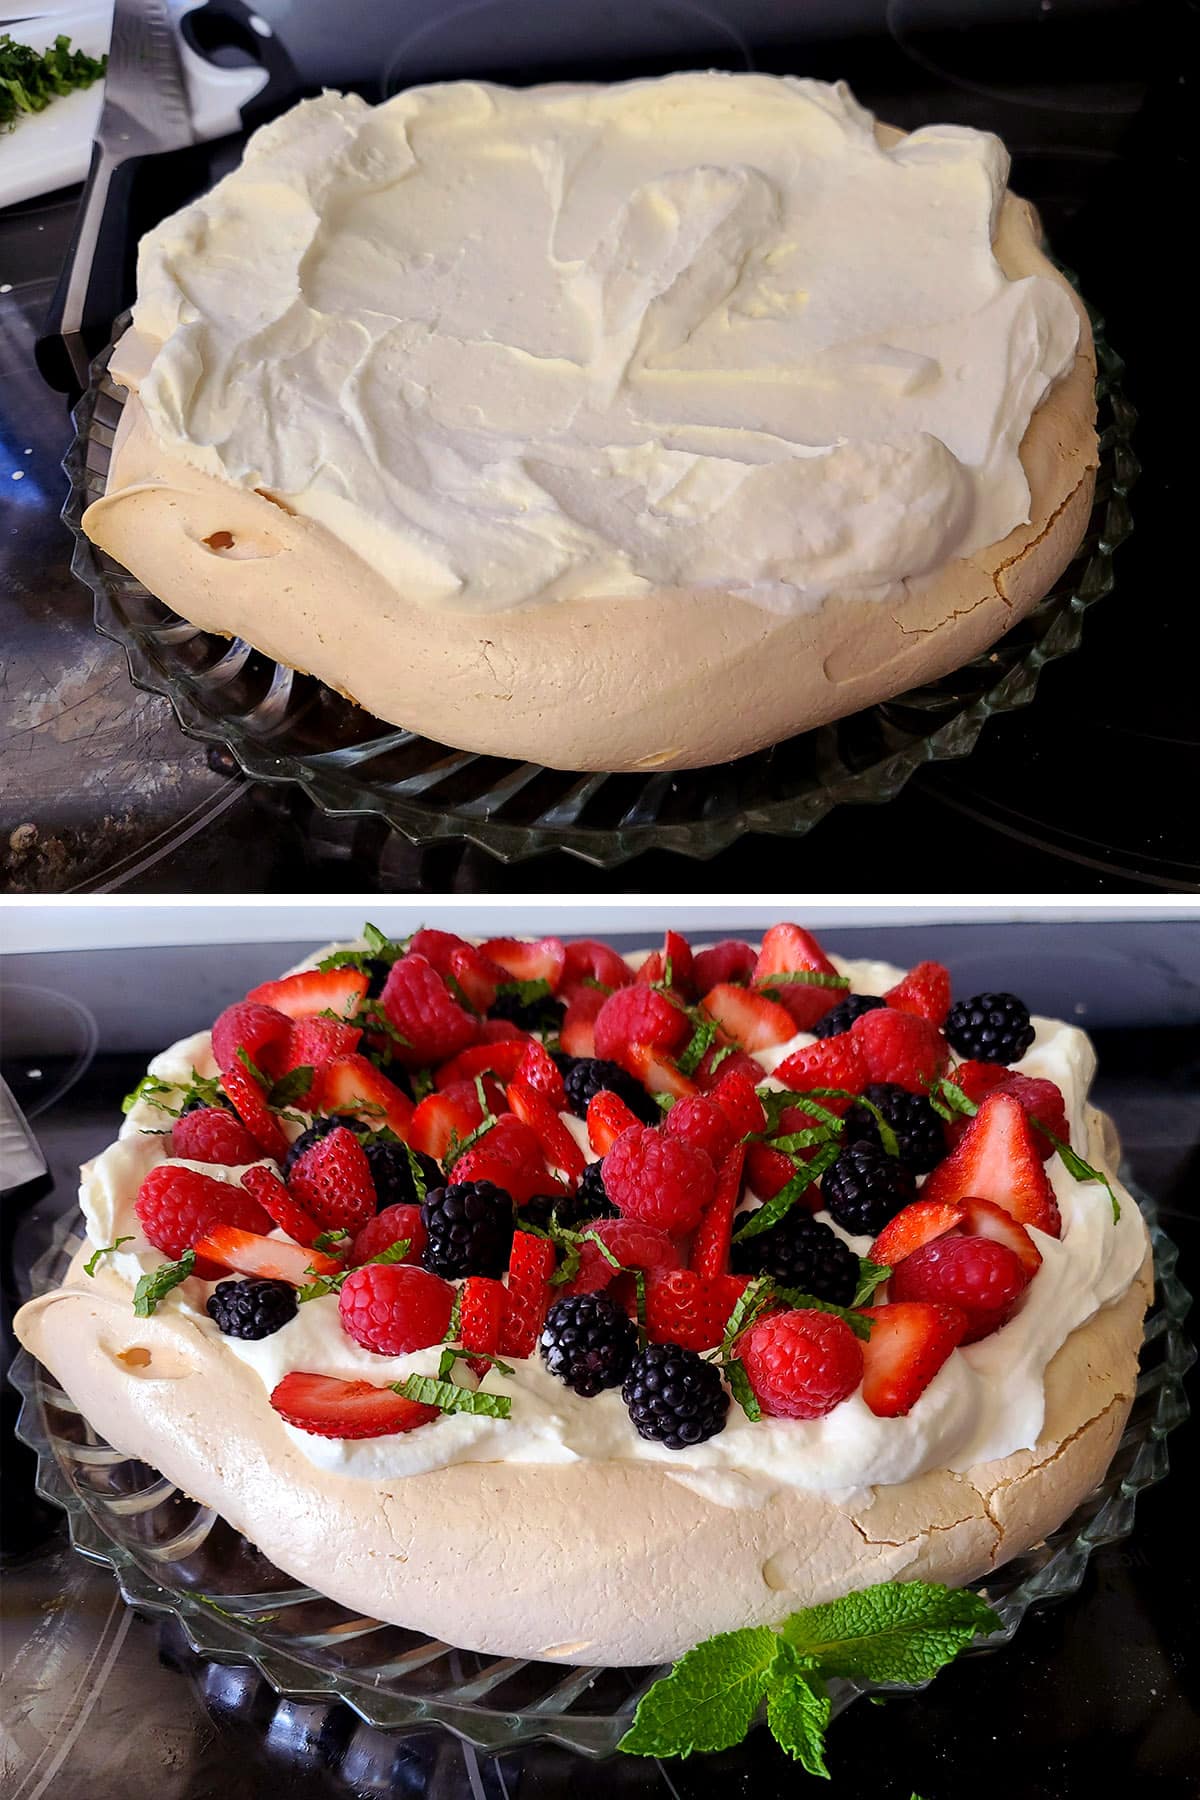 A 2 part image showing the meringue being spread with whipped cream then topped with berries.